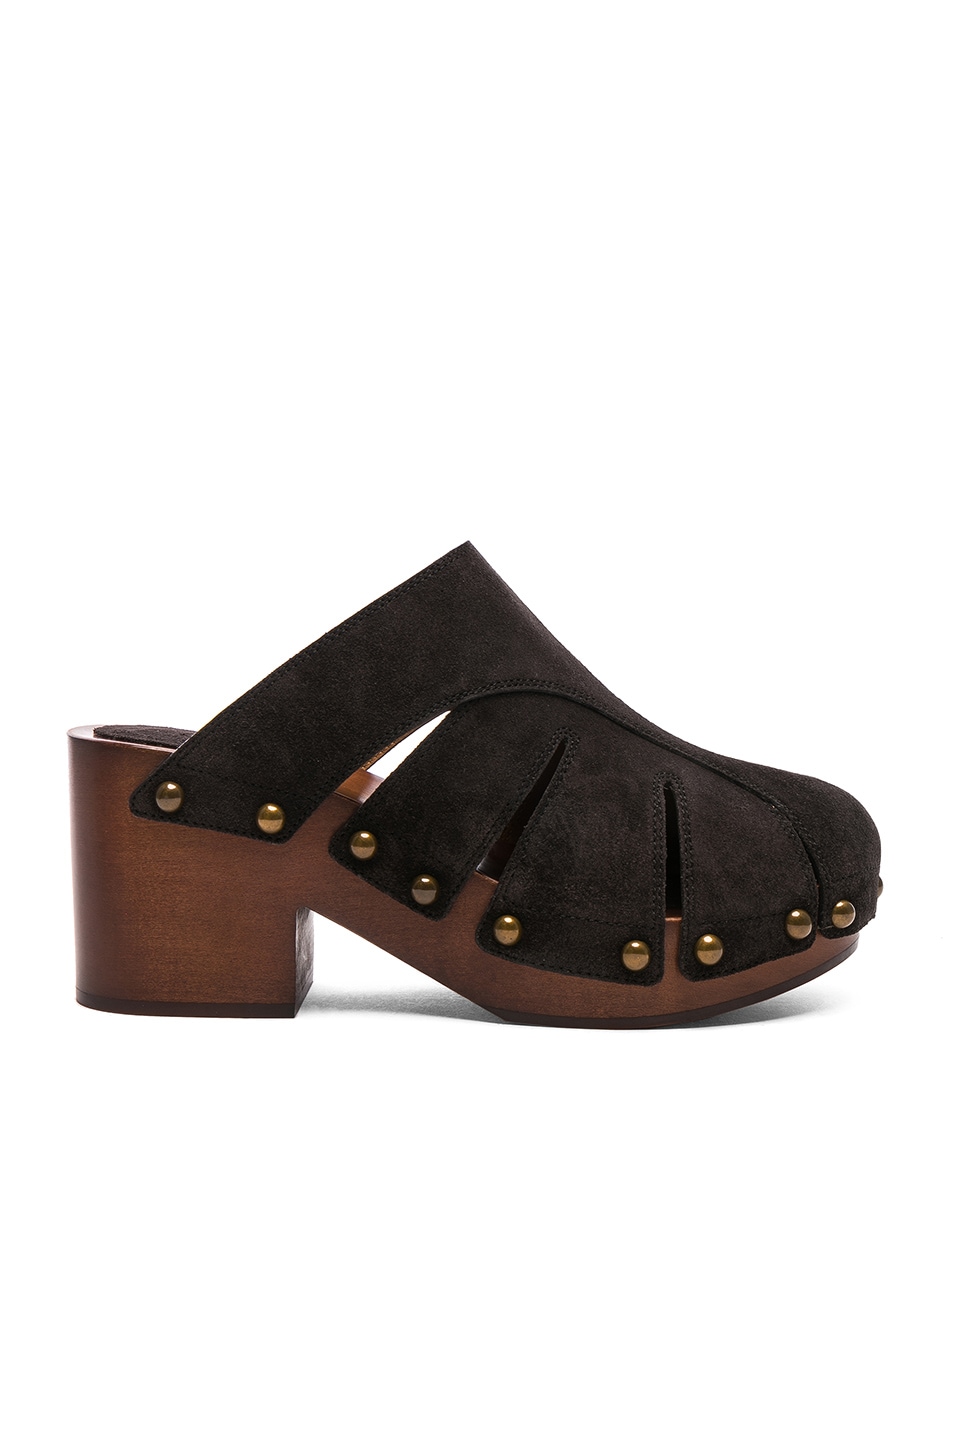 Image 1 of Chloe Suede Quinty Clogs in Charcoal Black